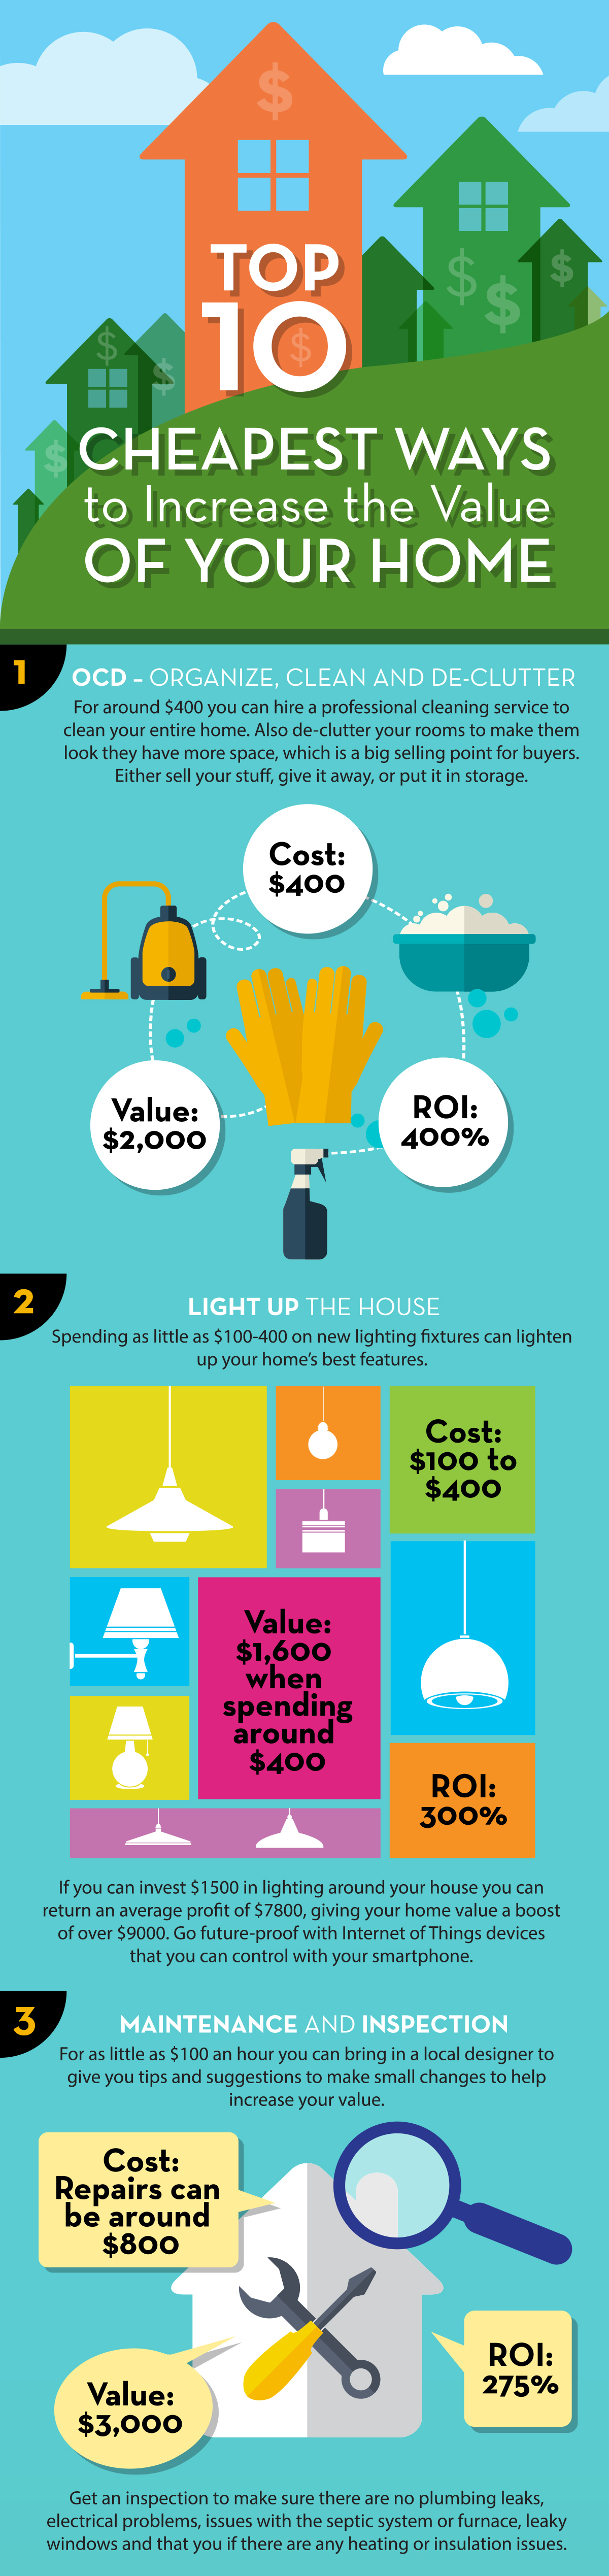 increase-the-value-of-your-home-1_5075